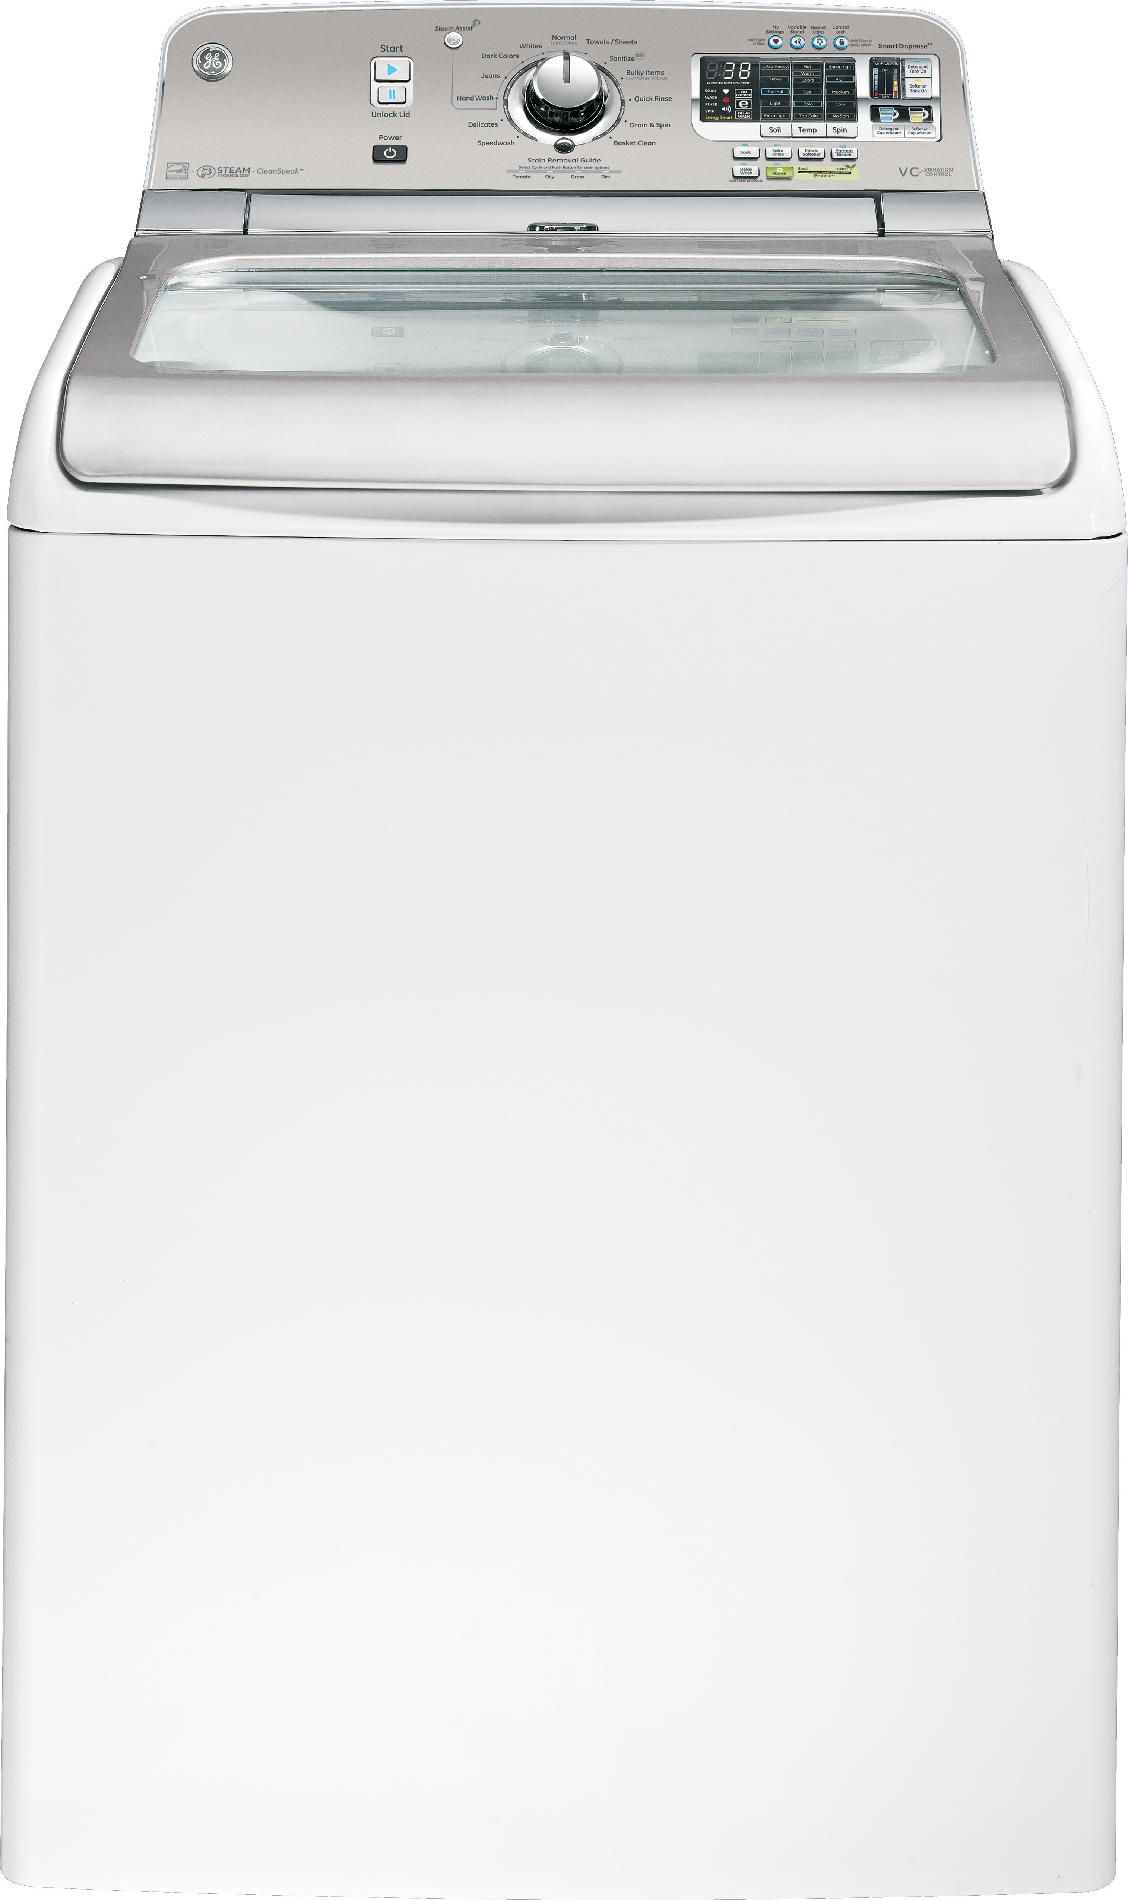 GE 5.0 cu. ft. Top-Load Washer - White